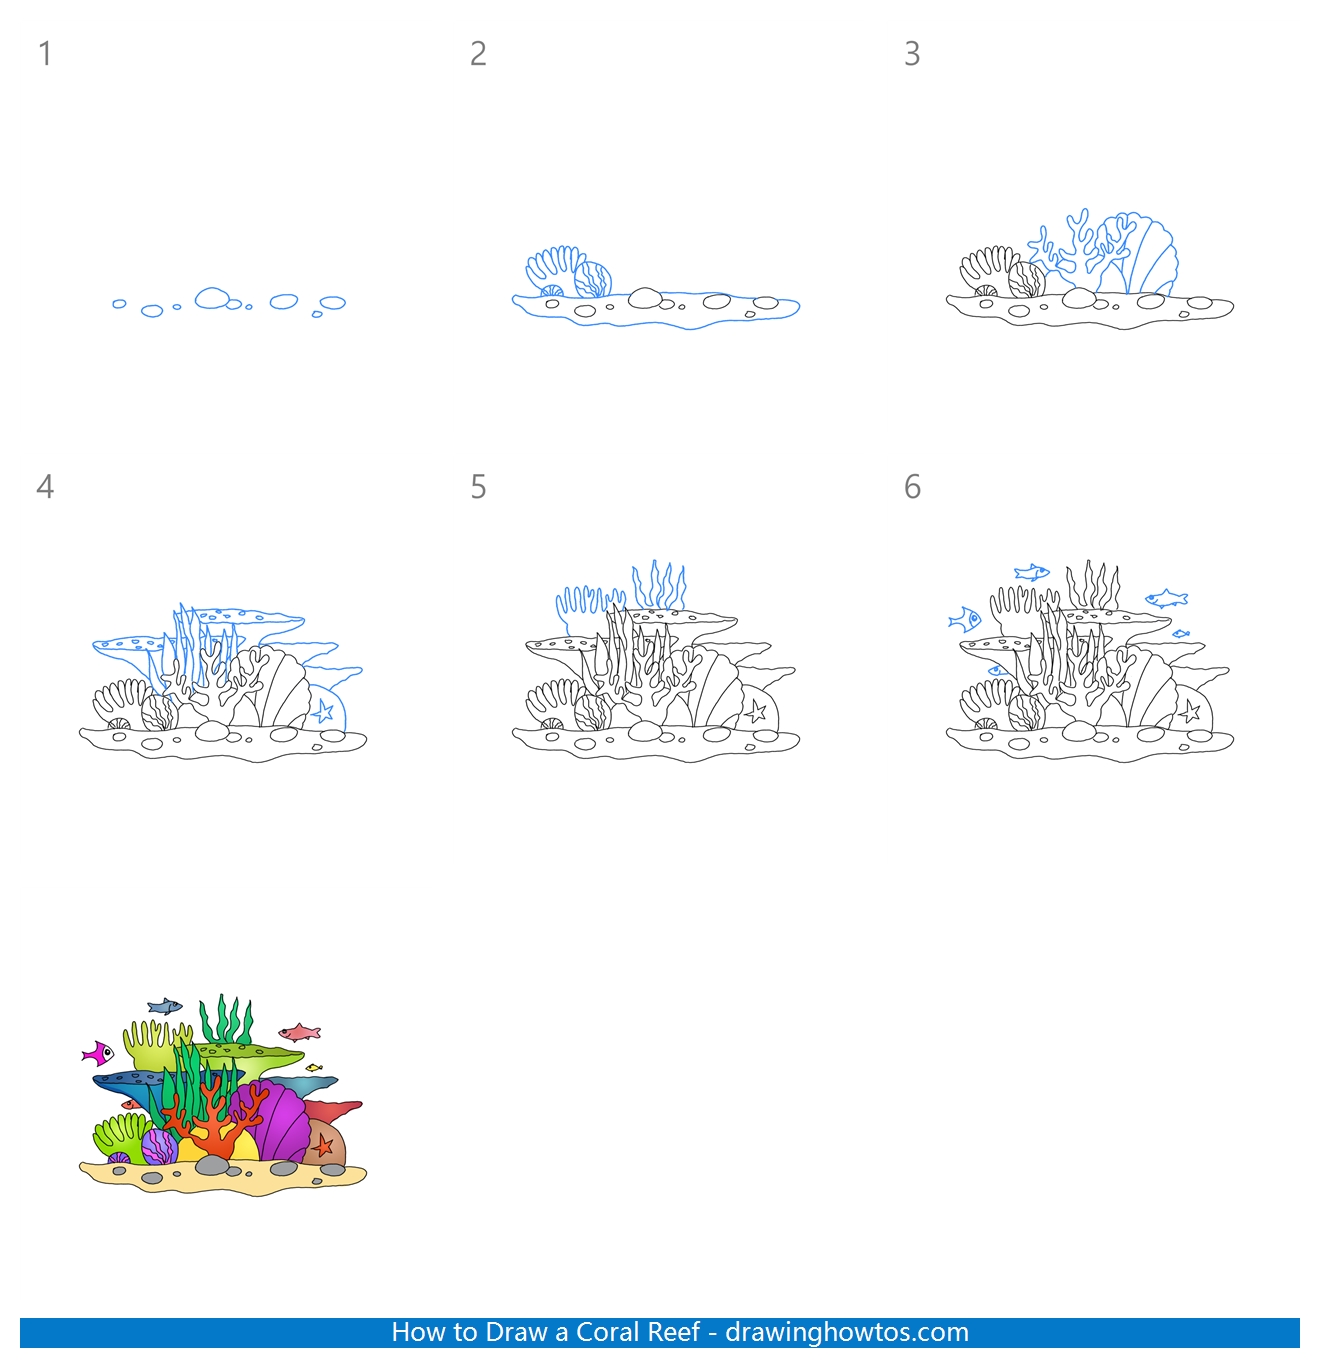 How to Draw a Coral Reef Step by Step